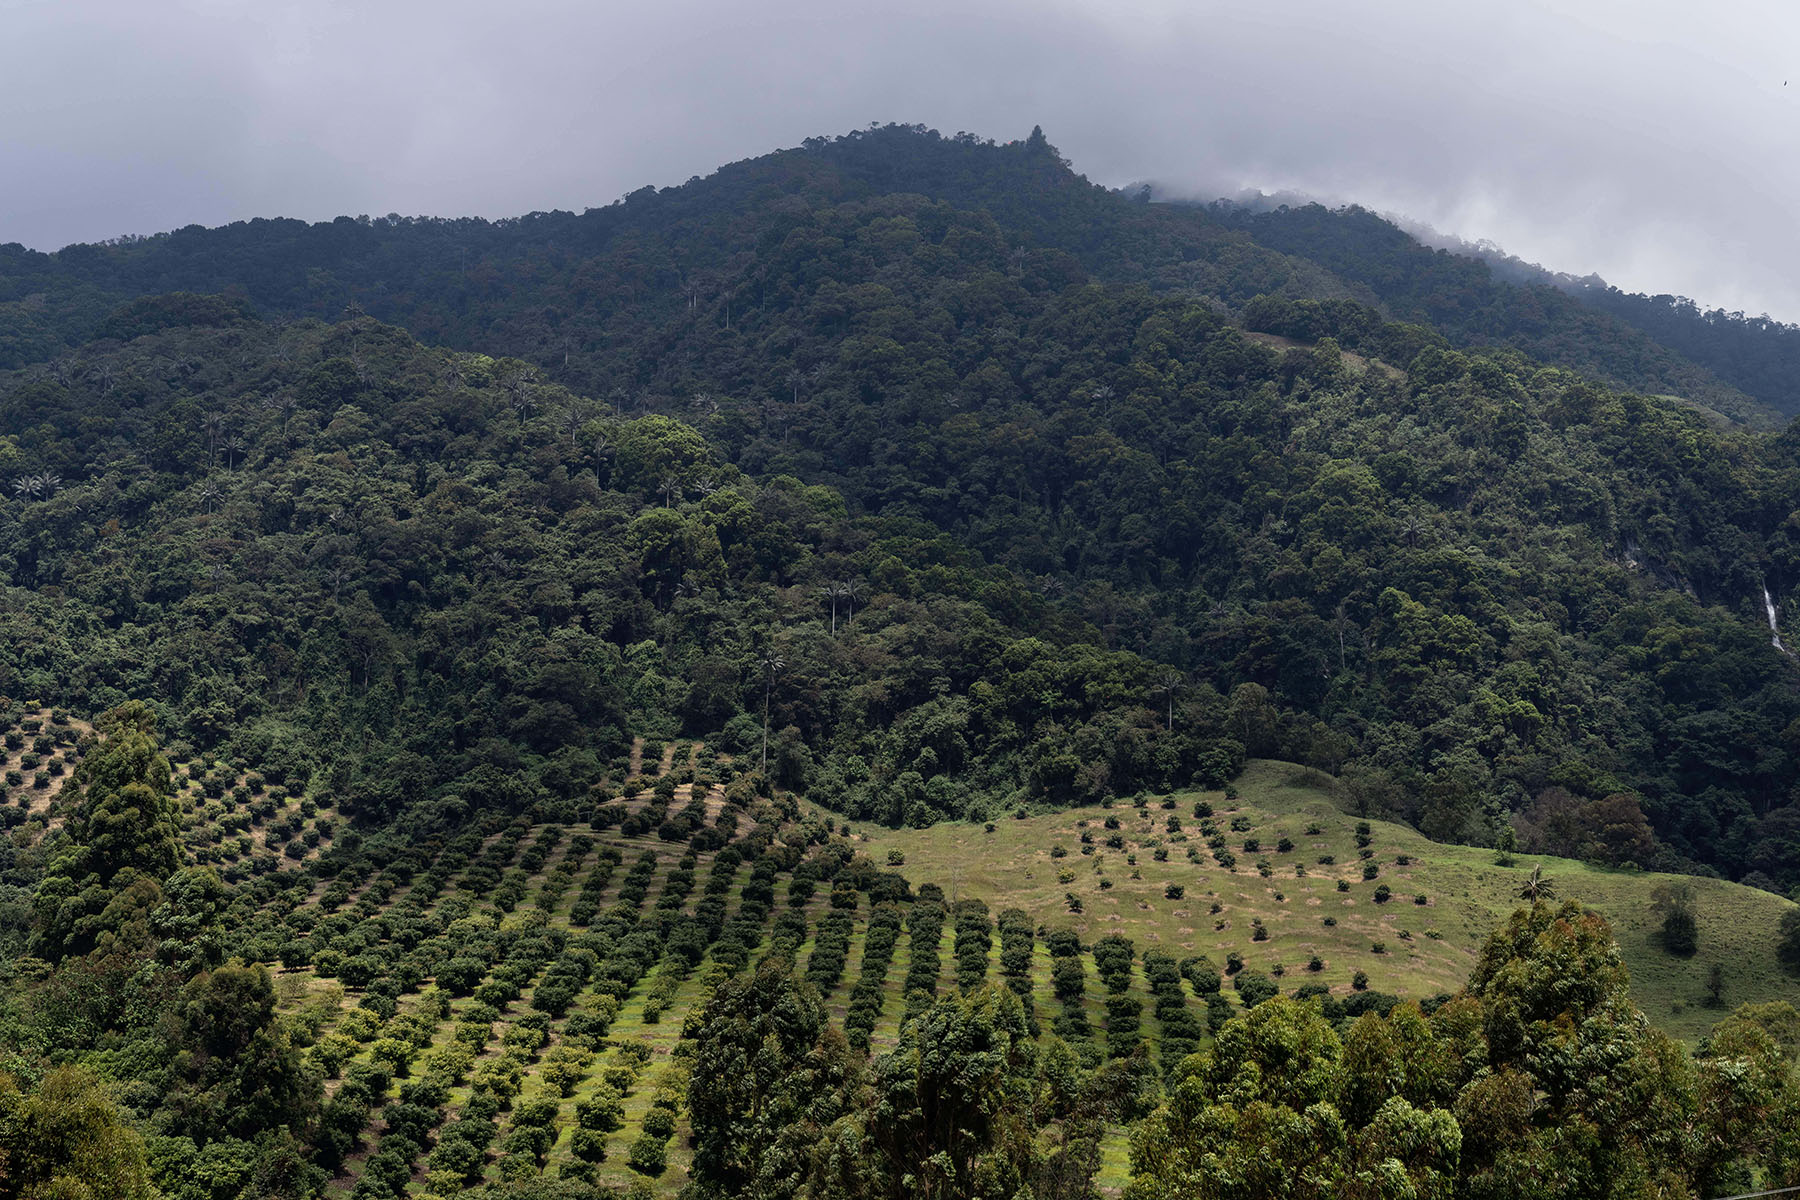 Avocado production in Colombia